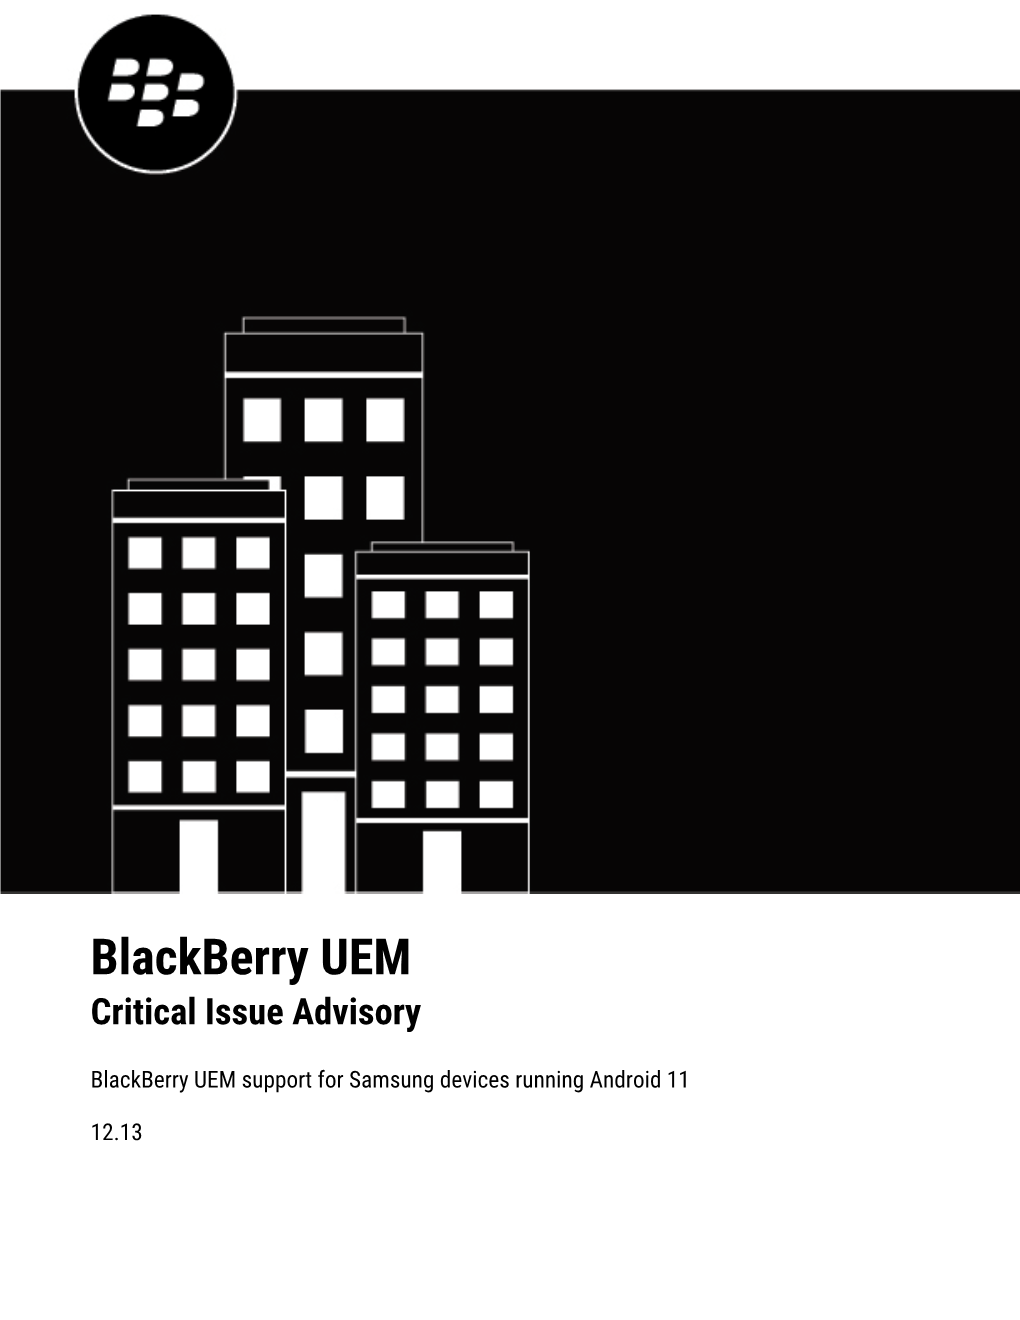 Blackberry UEM Support for Samsung Devices Running Android 11